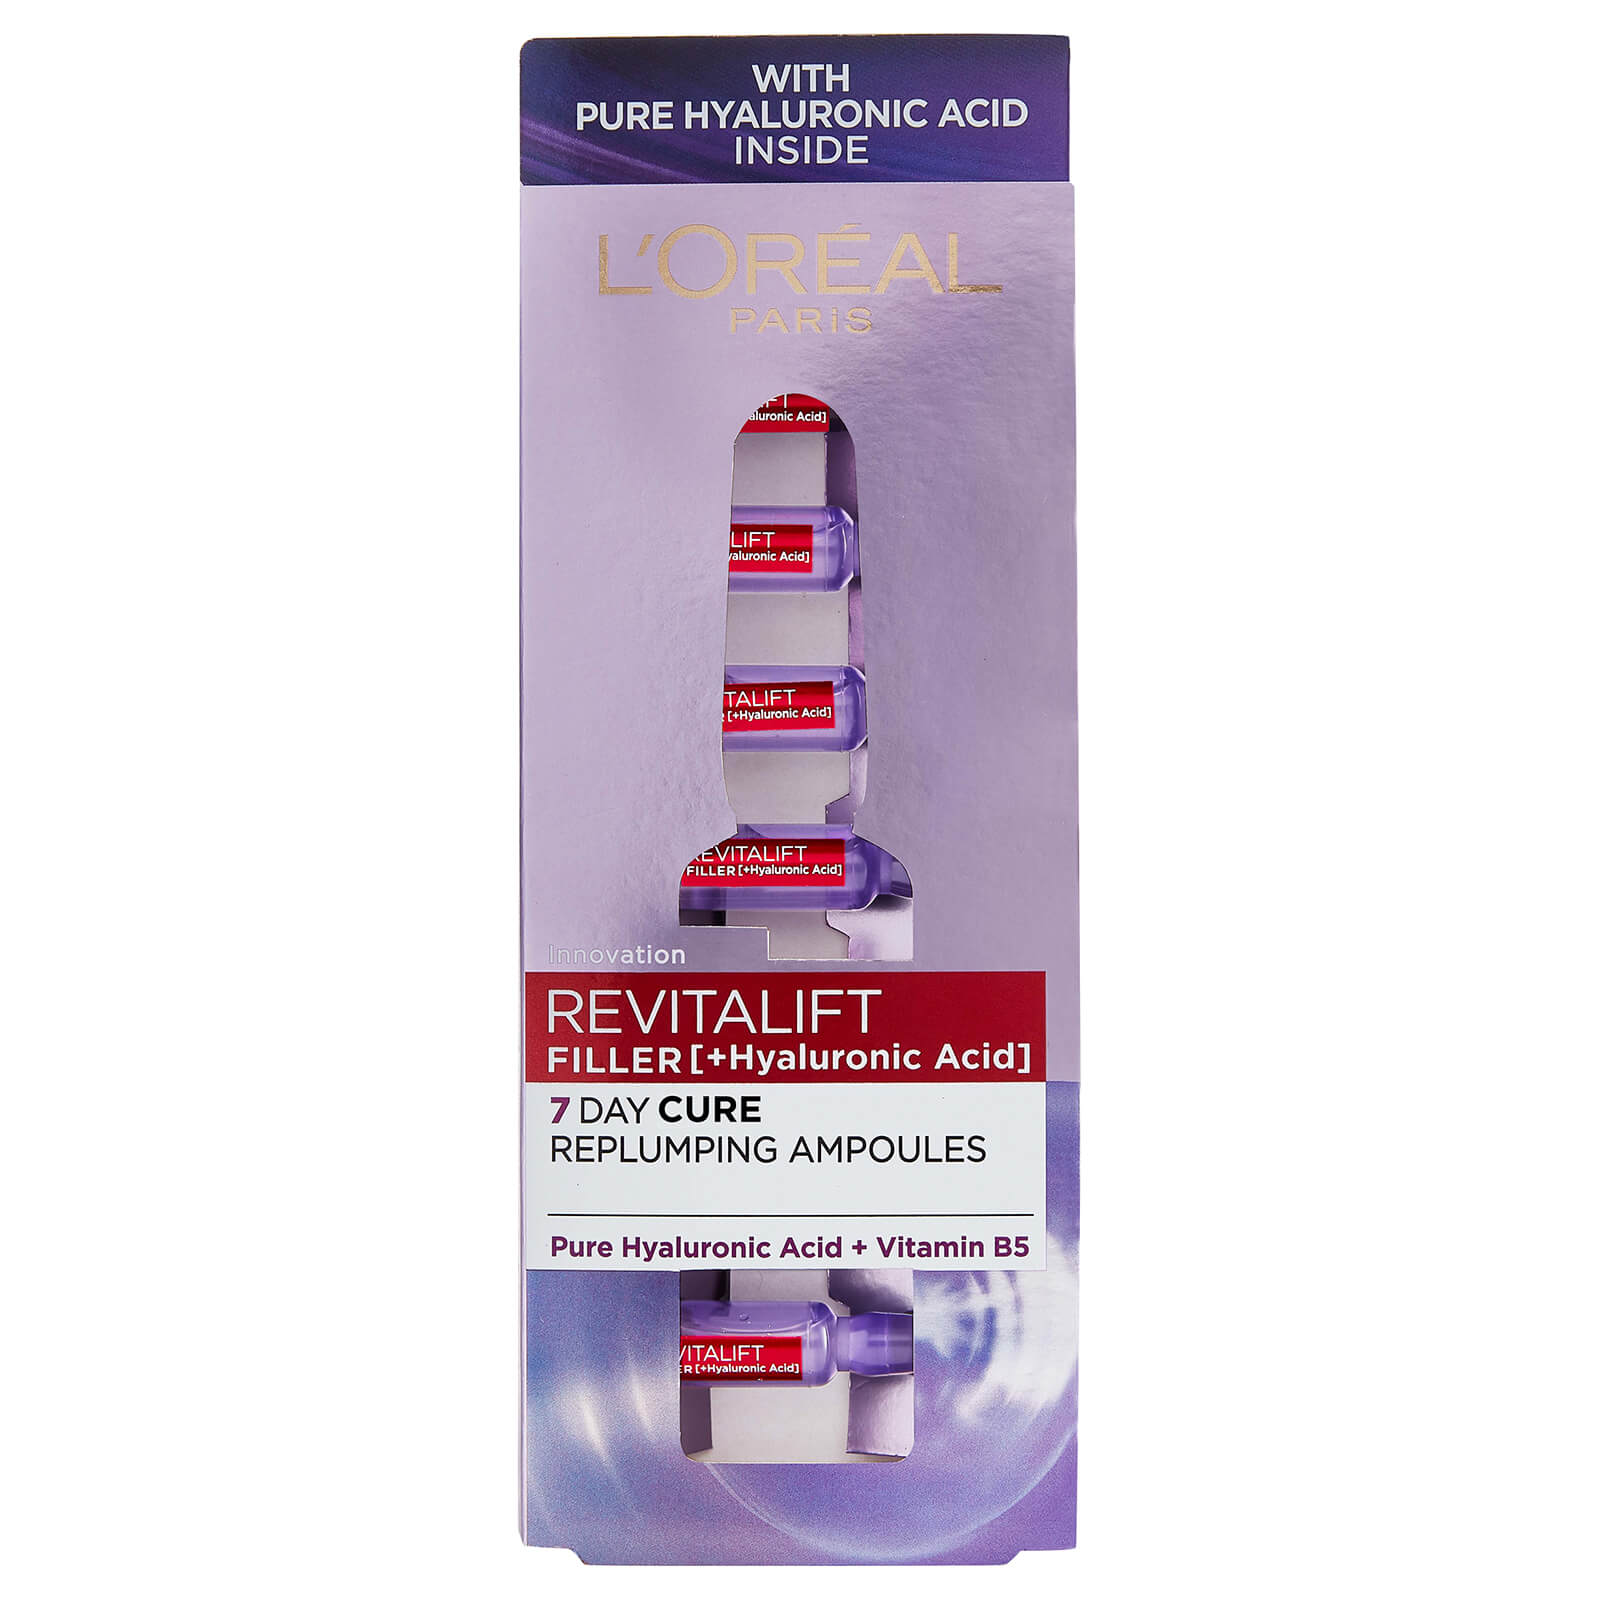 Main product image for Revitalift Filler Ampoules 